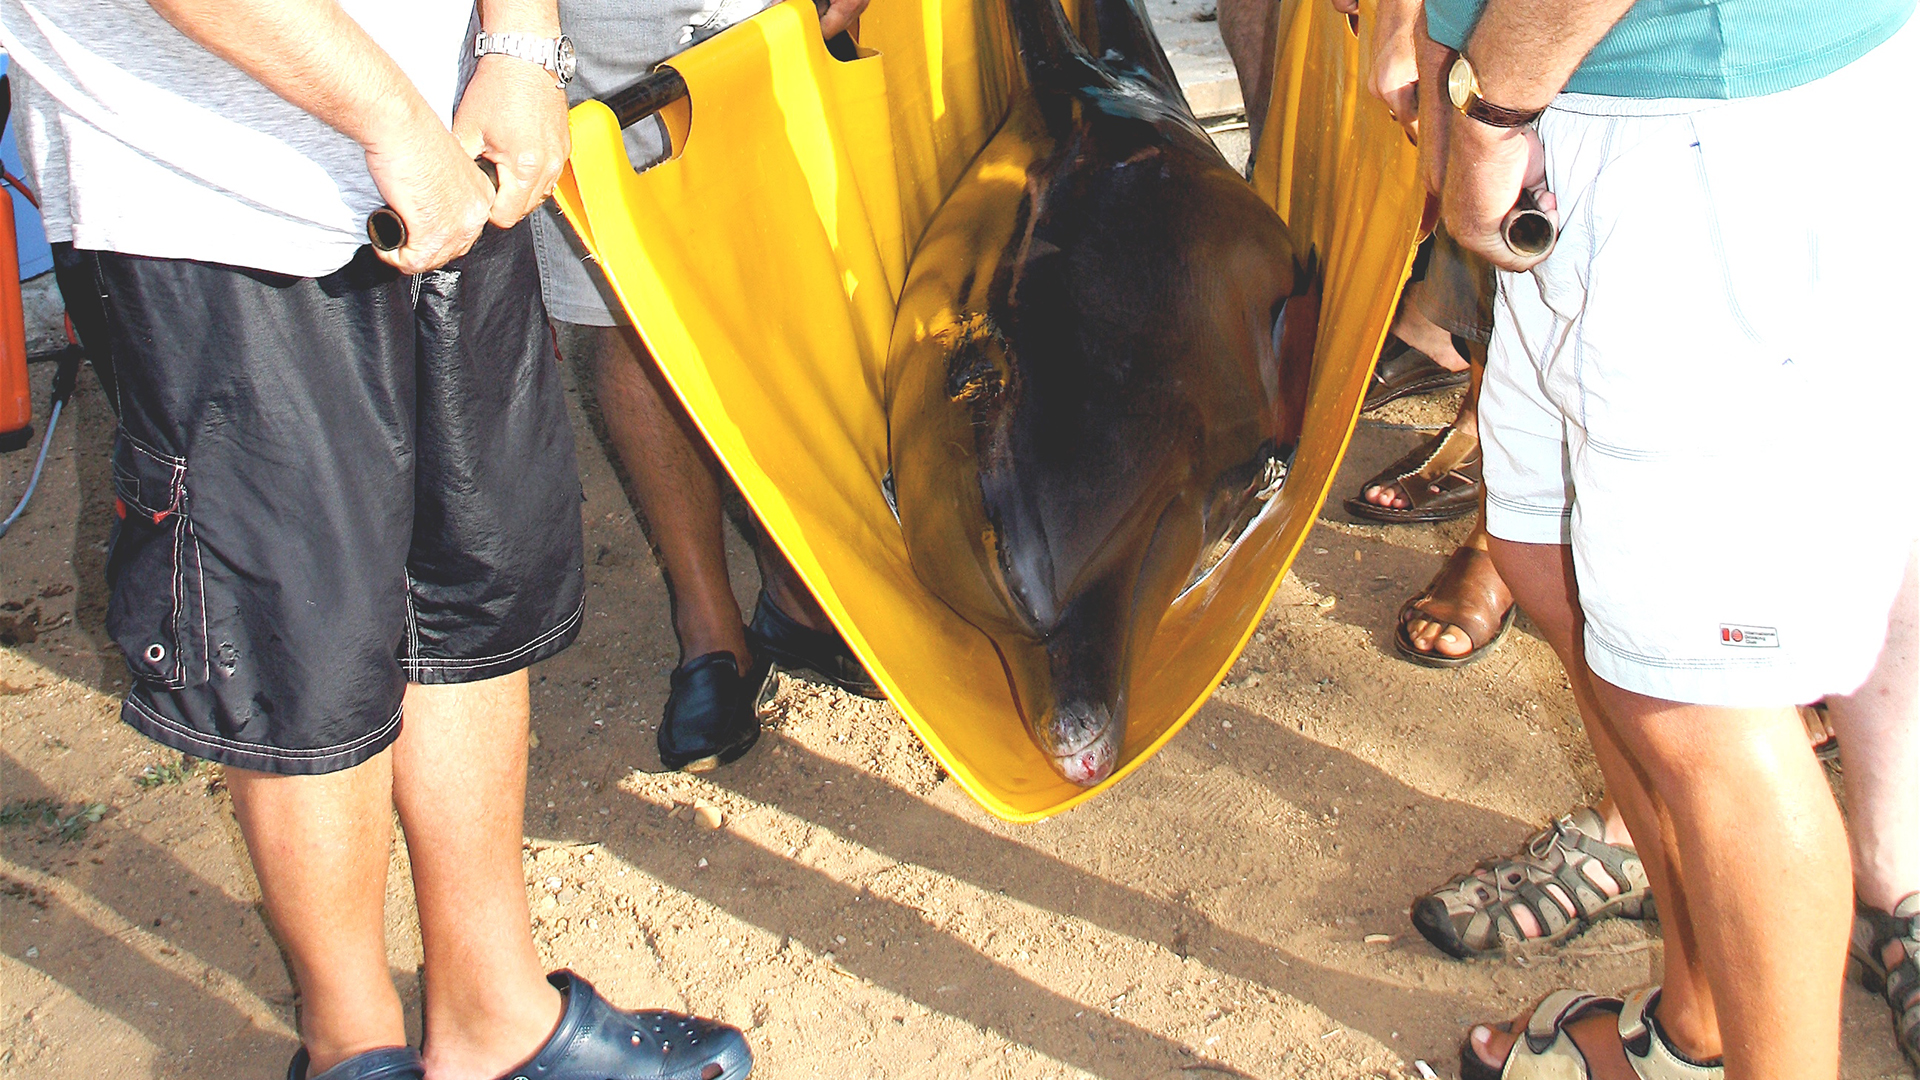 A dolphin is being lifted in a yellow sling